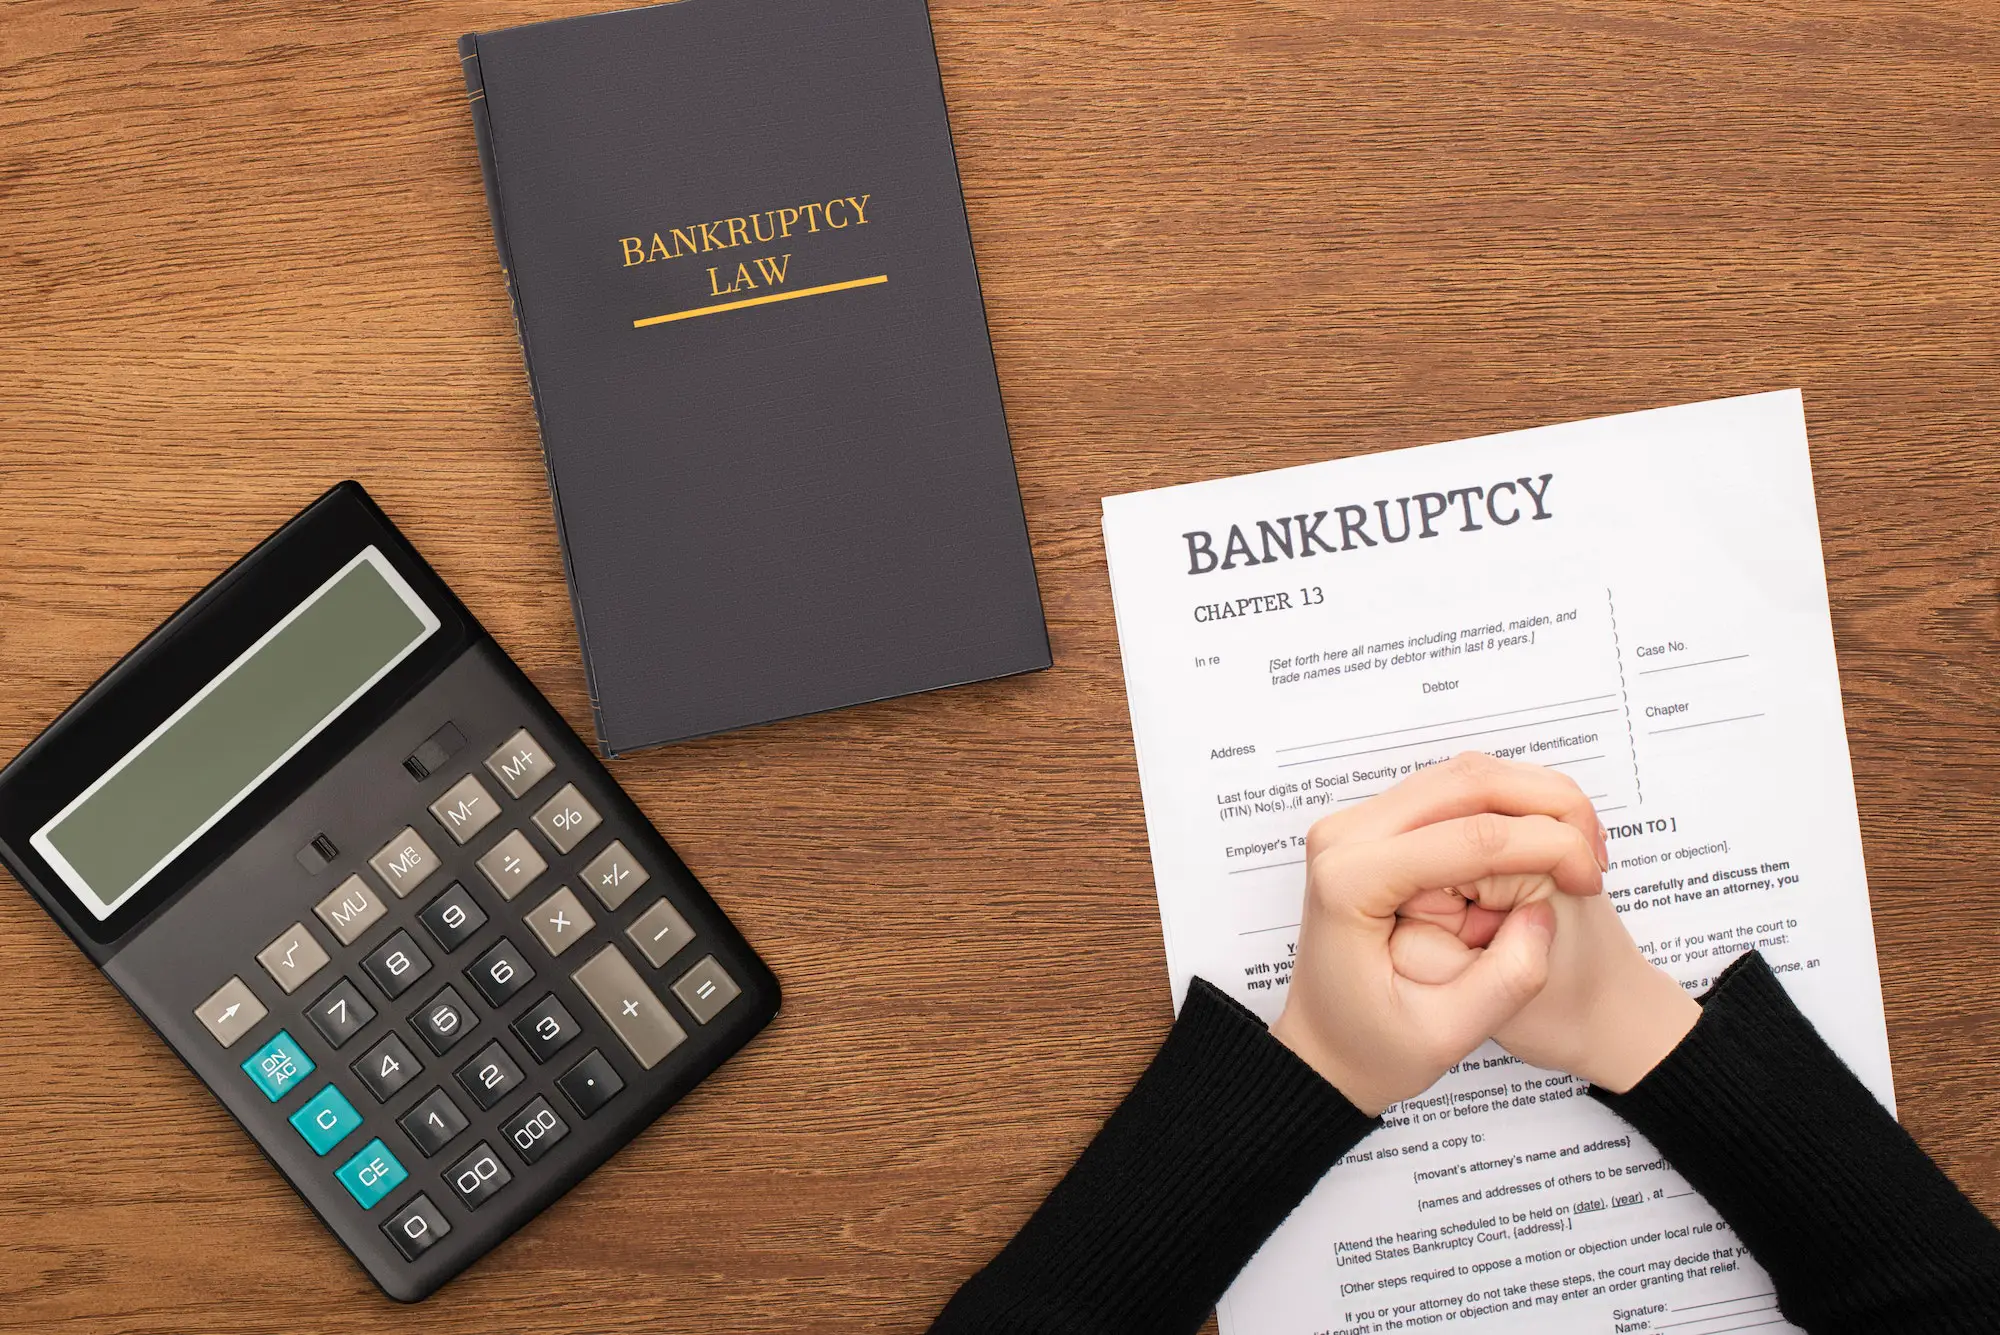 What happens with students loans after bankruptcy